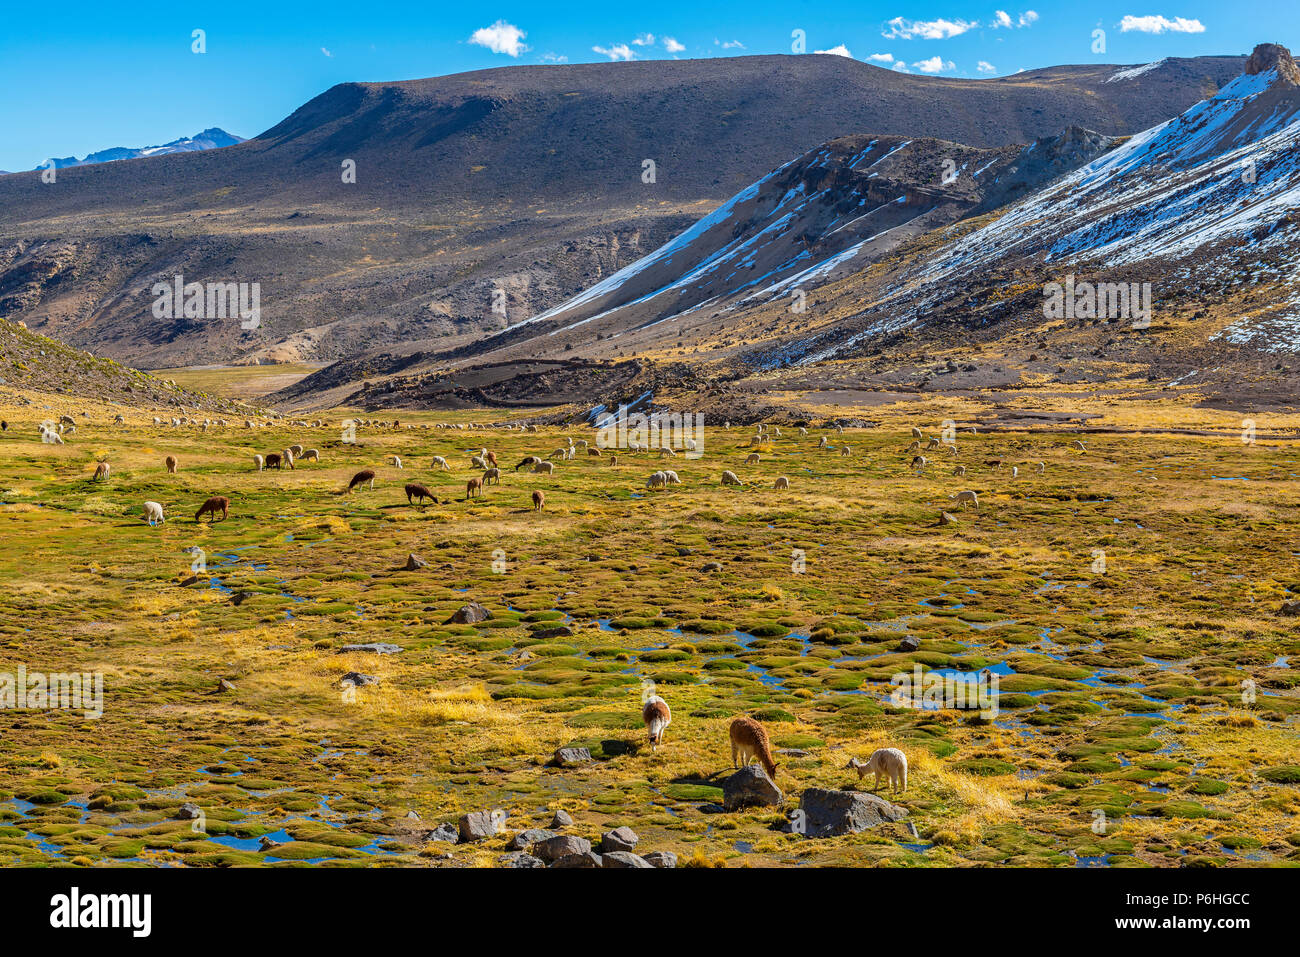 Alpacas and Llamas grazing in a fertile valley inside the National Reserve of Salinas y Aguada Blanca near the Colca Canyon in the Andes, Peru. Stock Photo